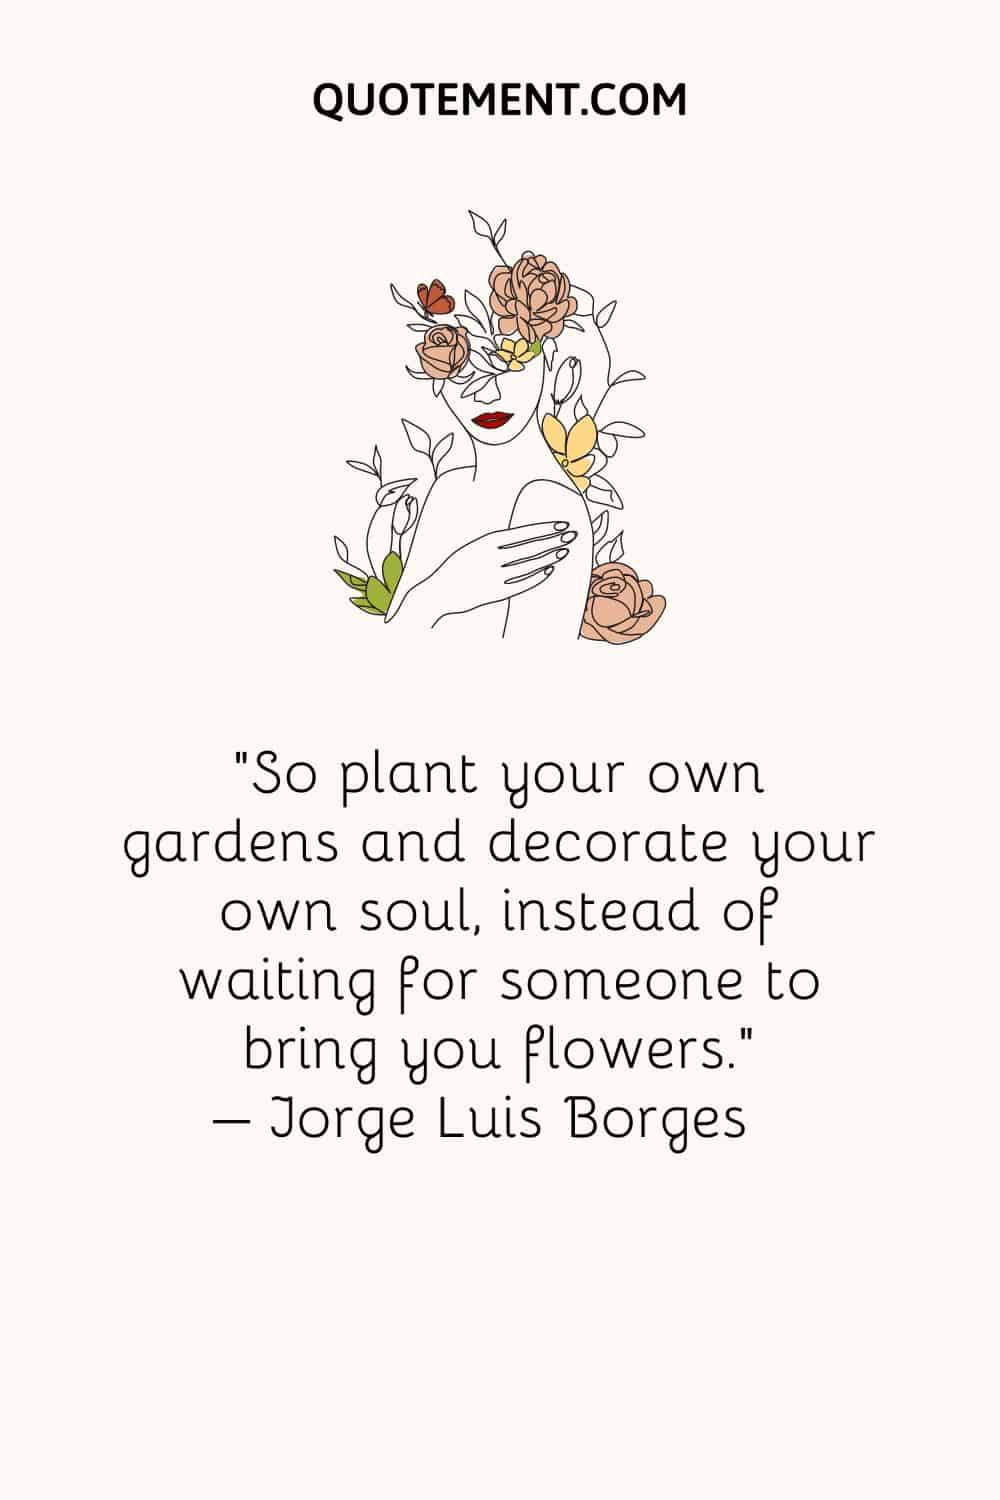 So plant your own gardens and decorate your own soul, instead of waiting for someone to bring you flowers